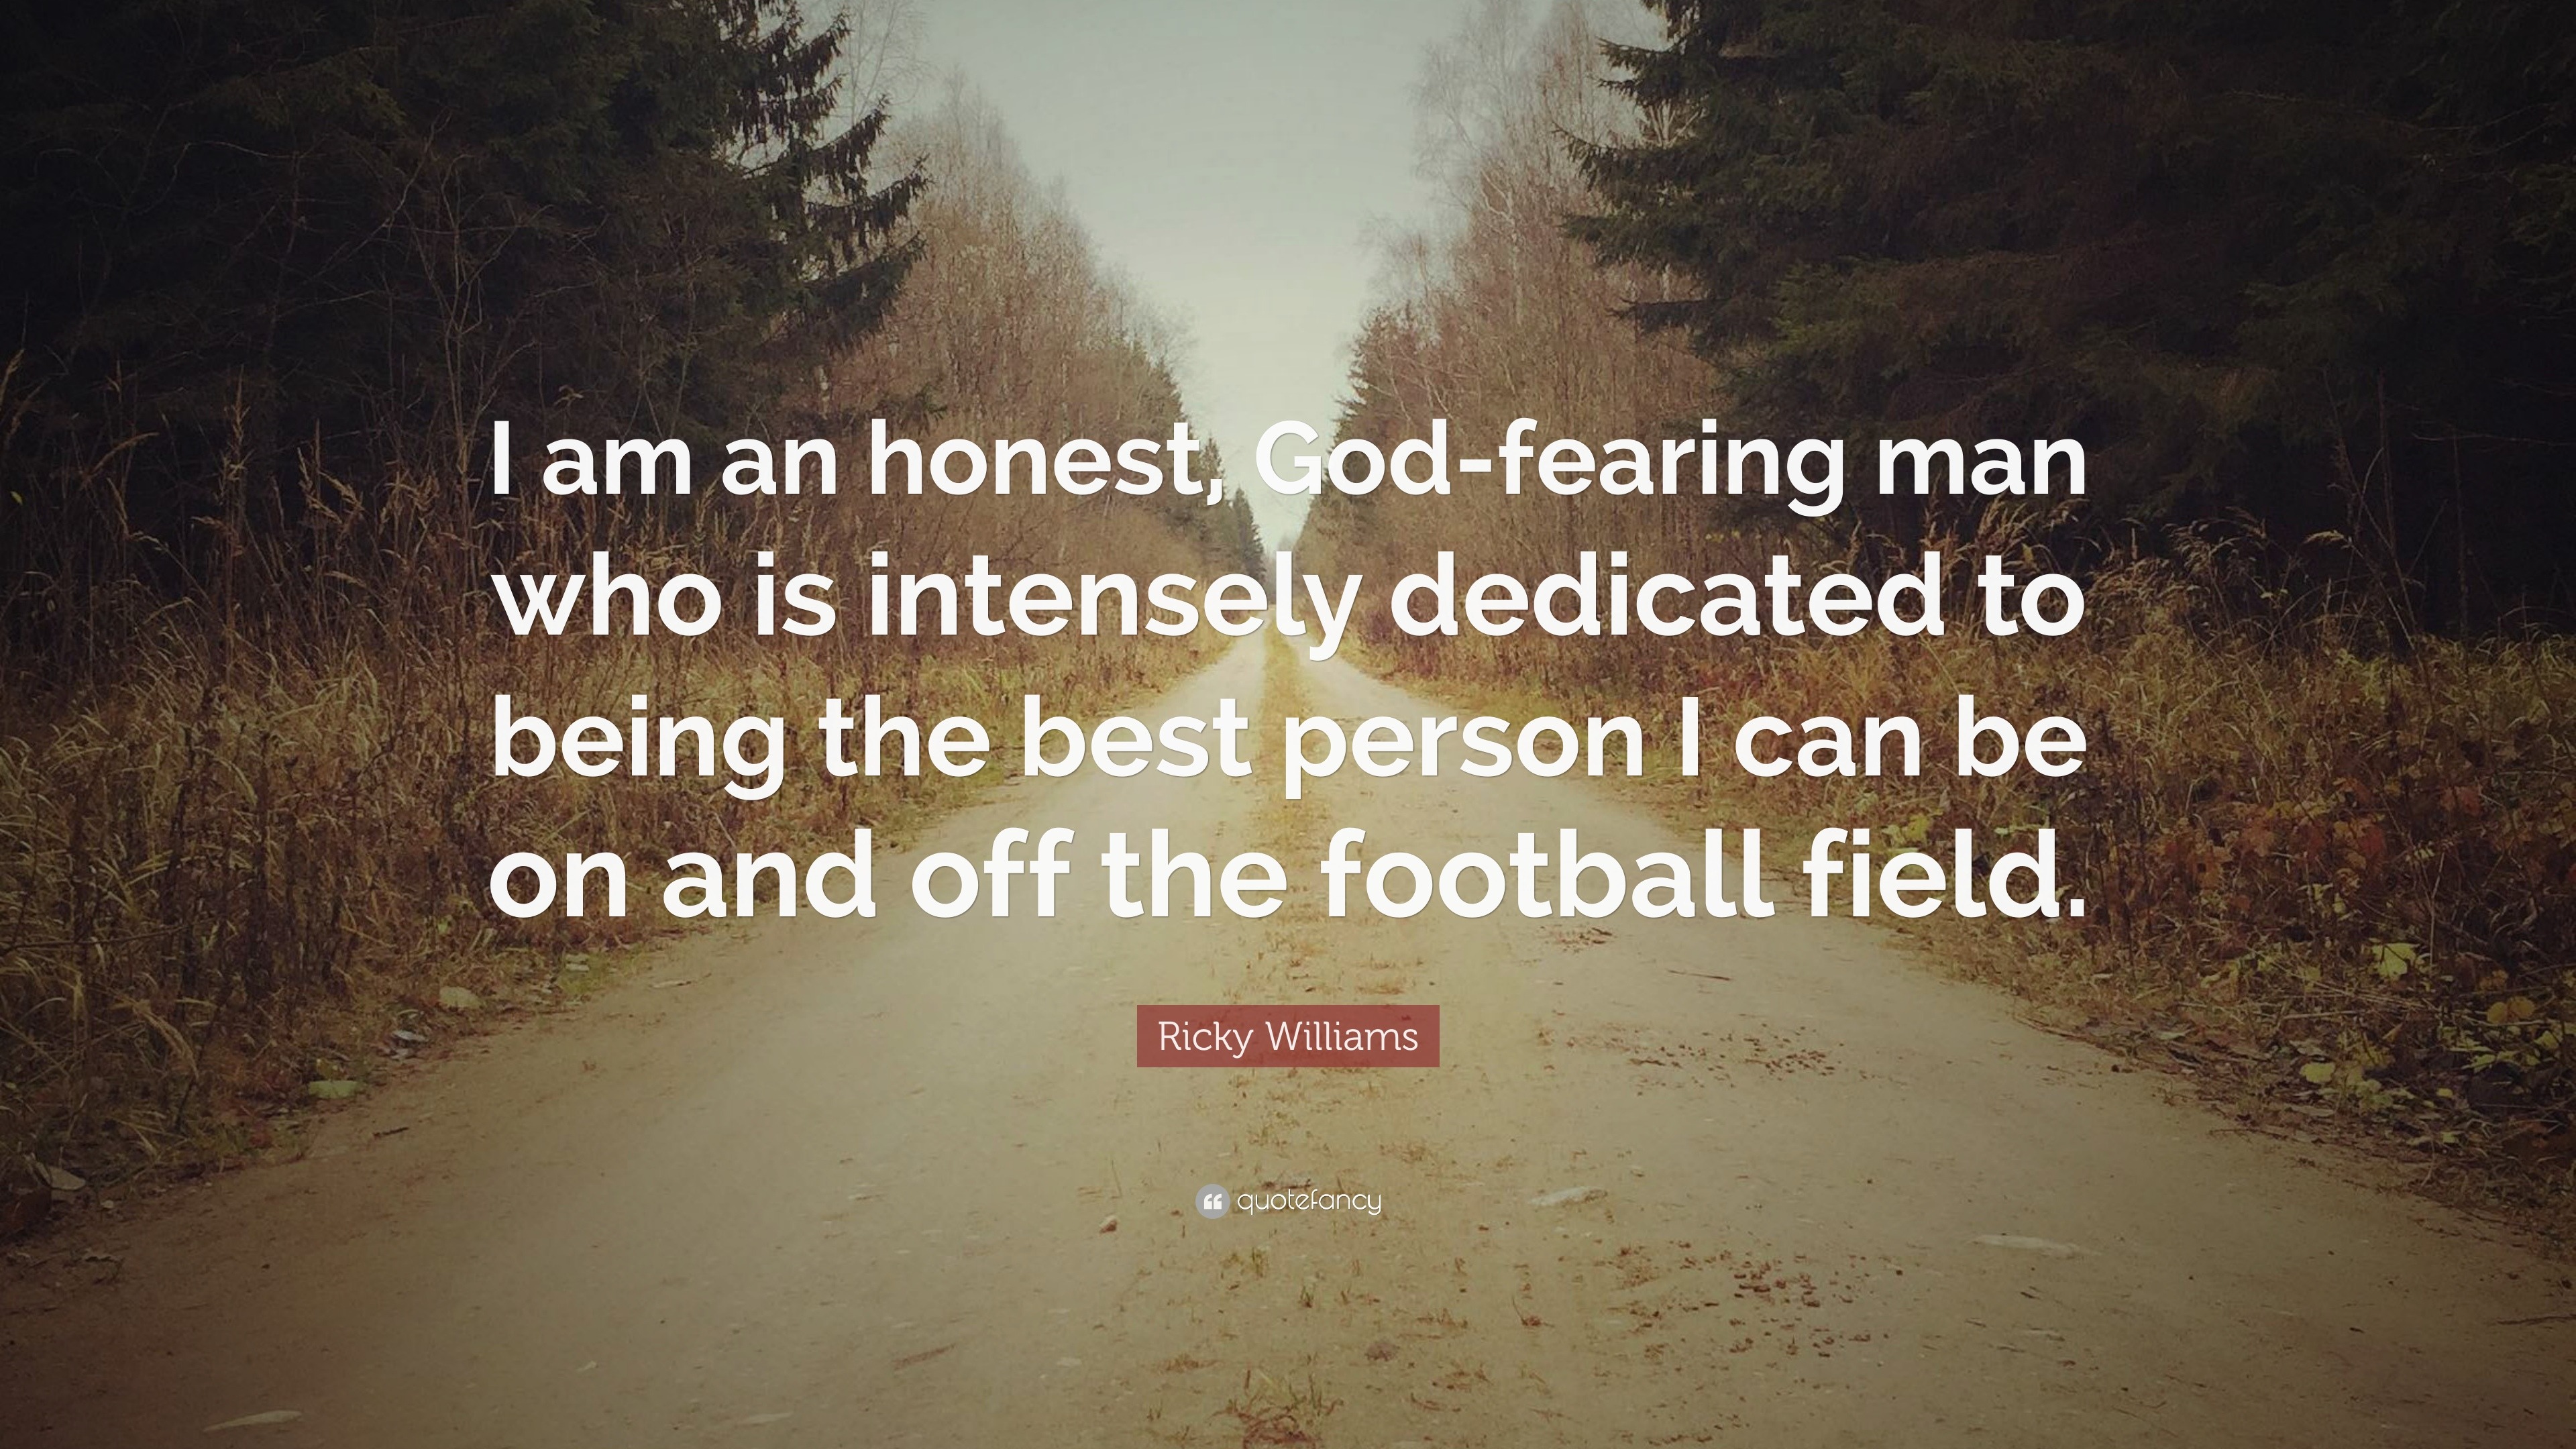 Ricky Williams Quote: “I am an honest, God-fearing man who is intensely ...